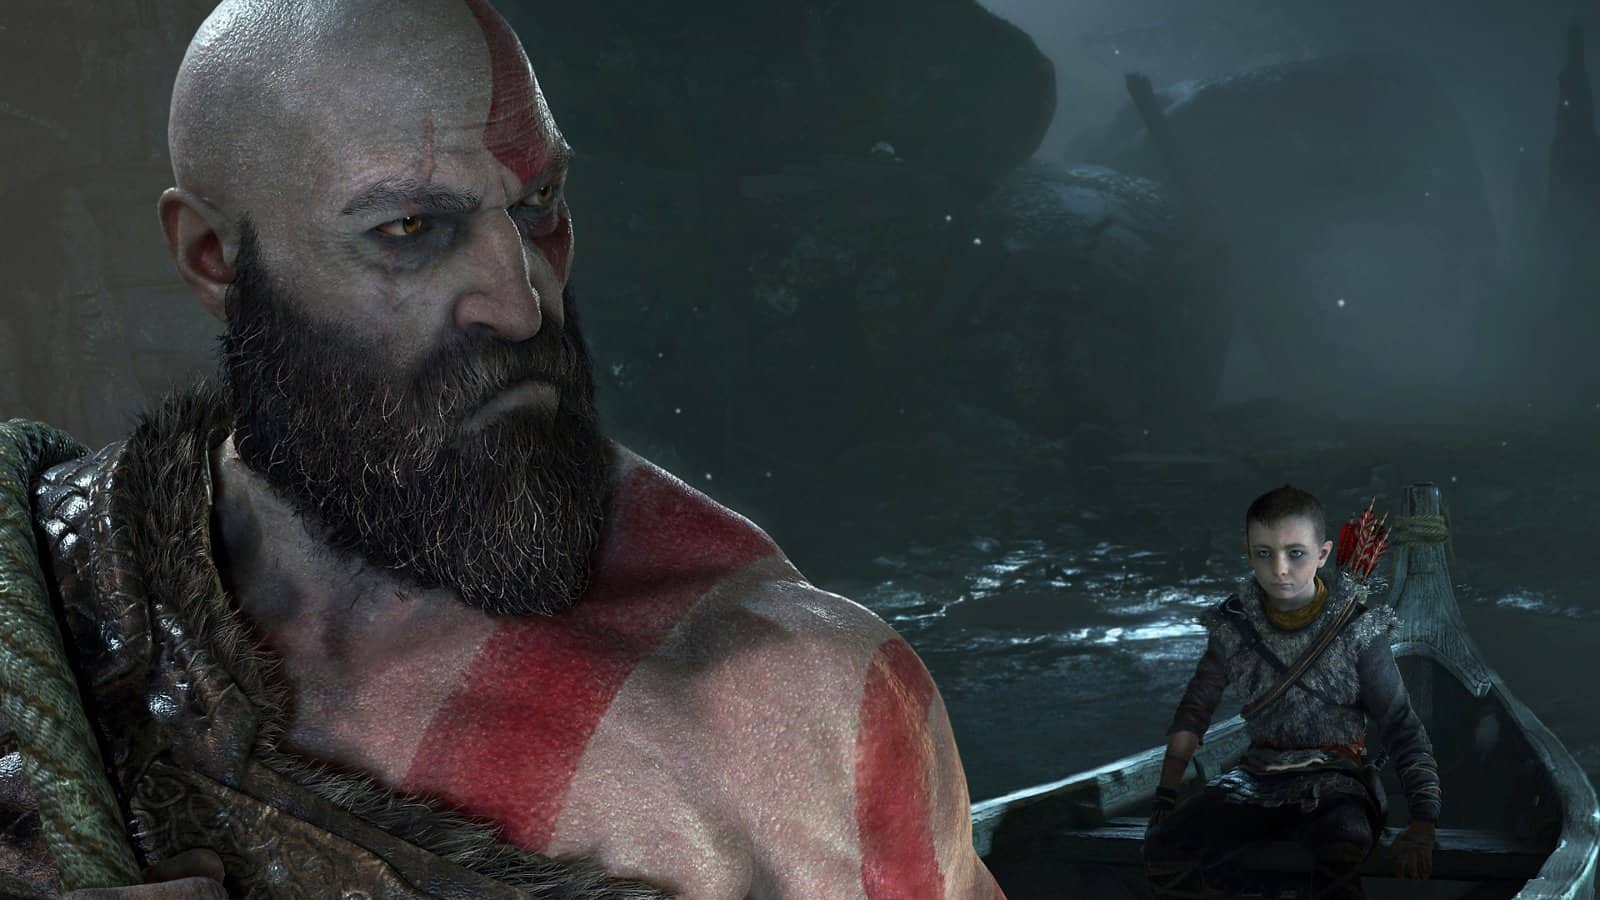 With God of War: Ragnarok On PS4, Who Needs A PS5?